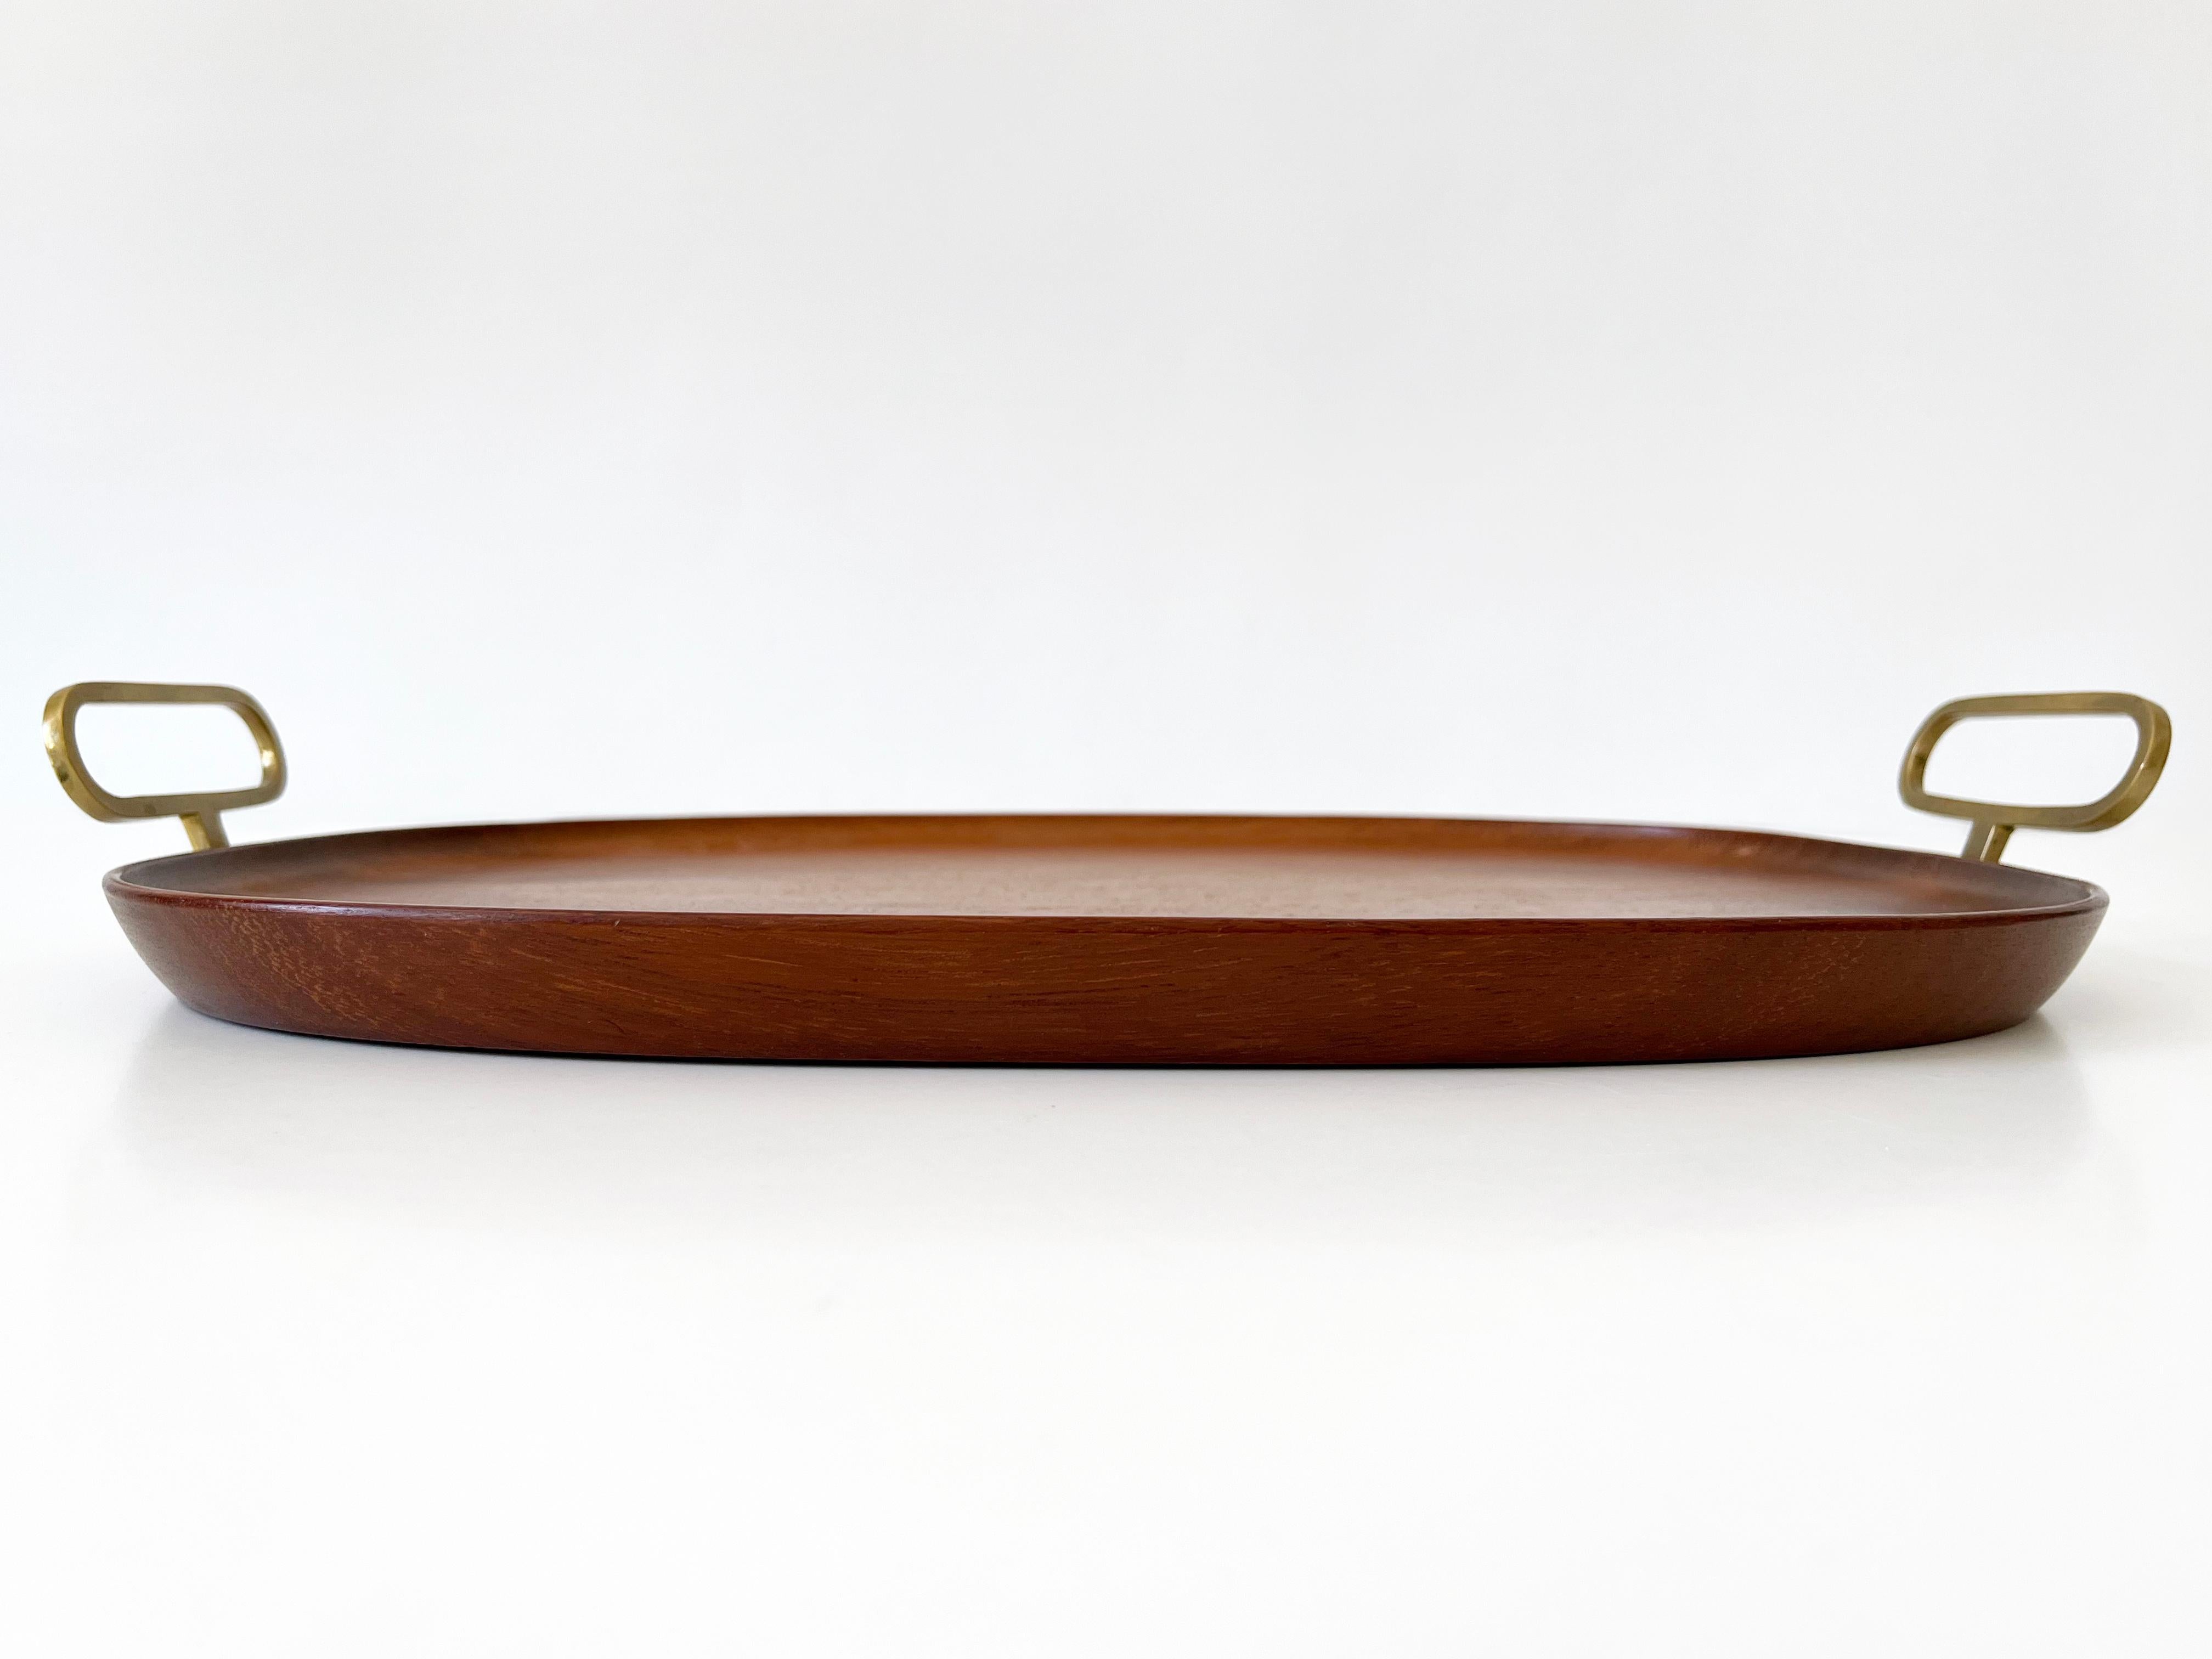 Brass Extremely Rare Mid-Century Modern Teak Serving Tray by Carl Auböck Austria 1950s For Sale